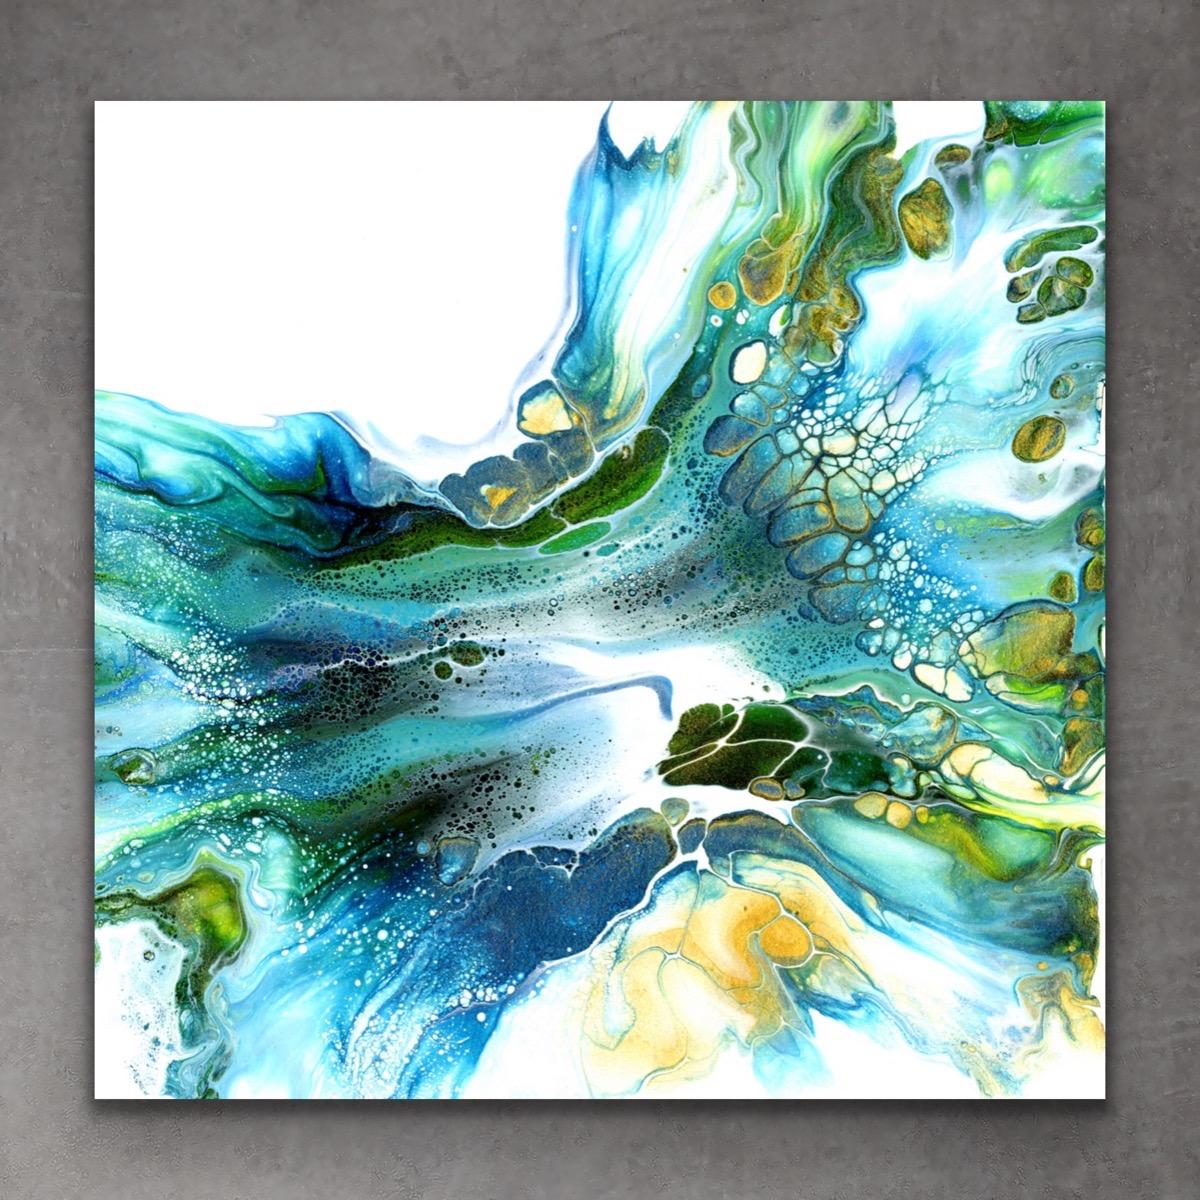 Contemporary Modern Abstract, Giclee Print on Metal, Limited Edition, by Cessy  5